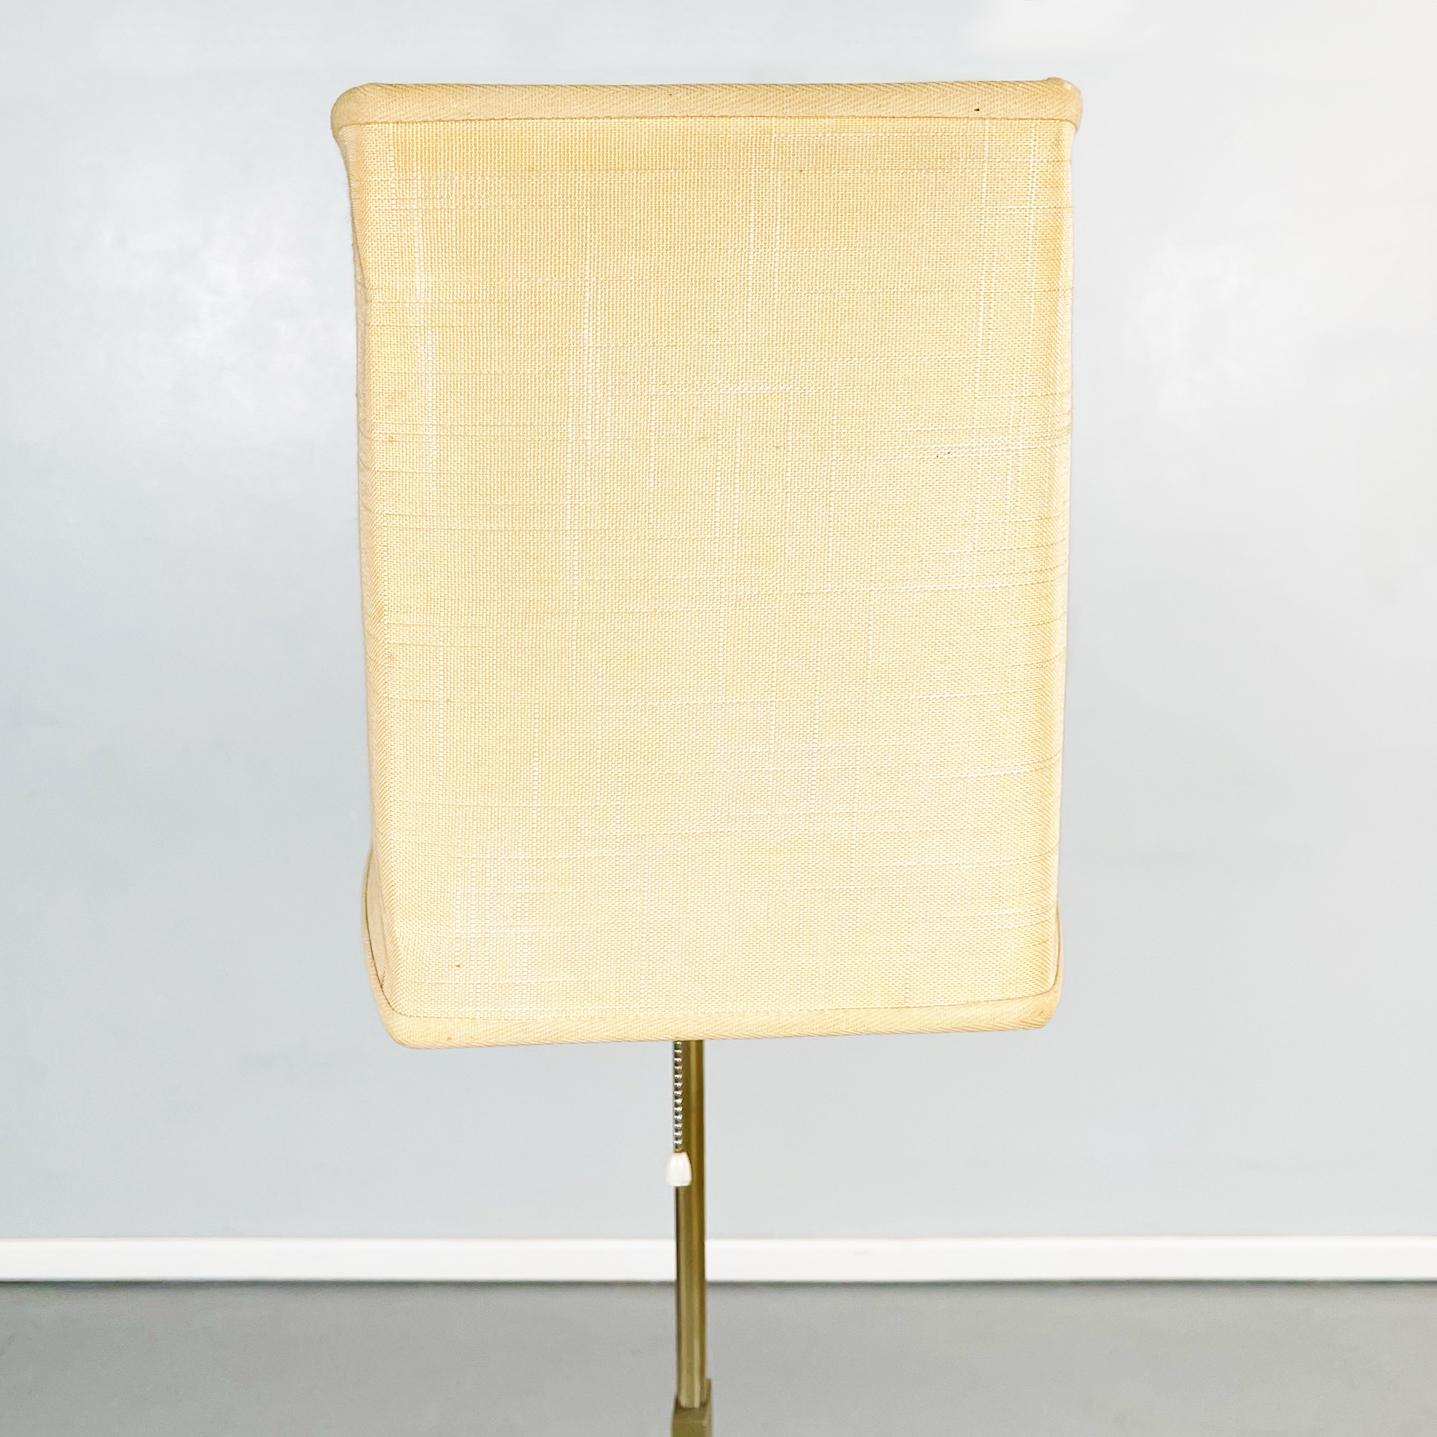 Italian Mid-Century Floor Lamp in Fabric, Leather and Brass by Stilnovo, 1970s For Sale 1